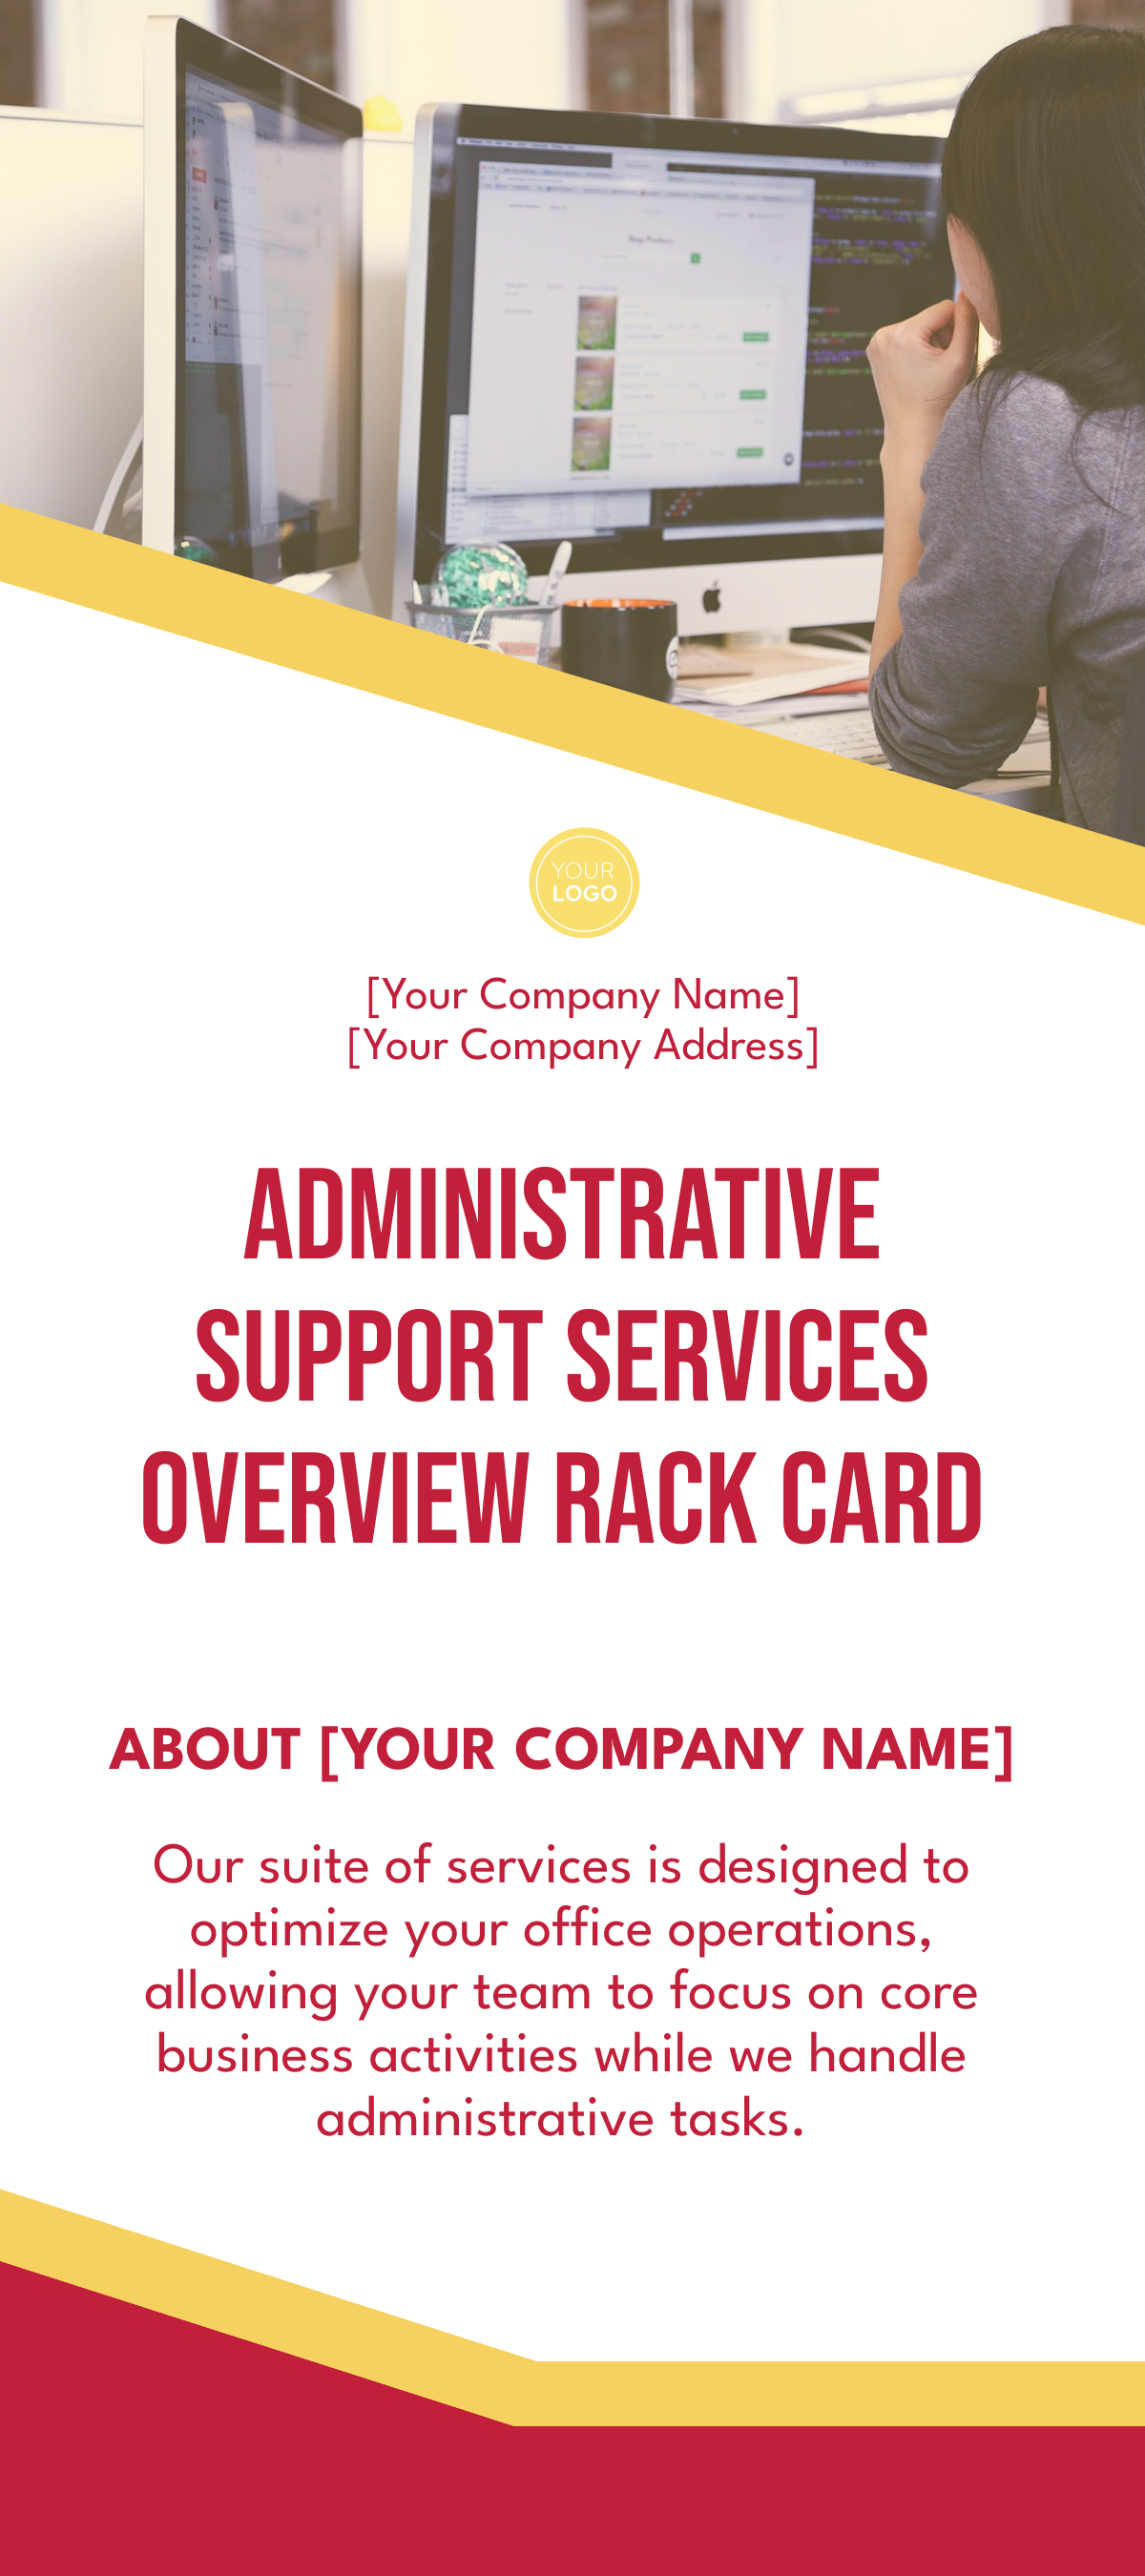 Administrative Support Services Overview Rack Card